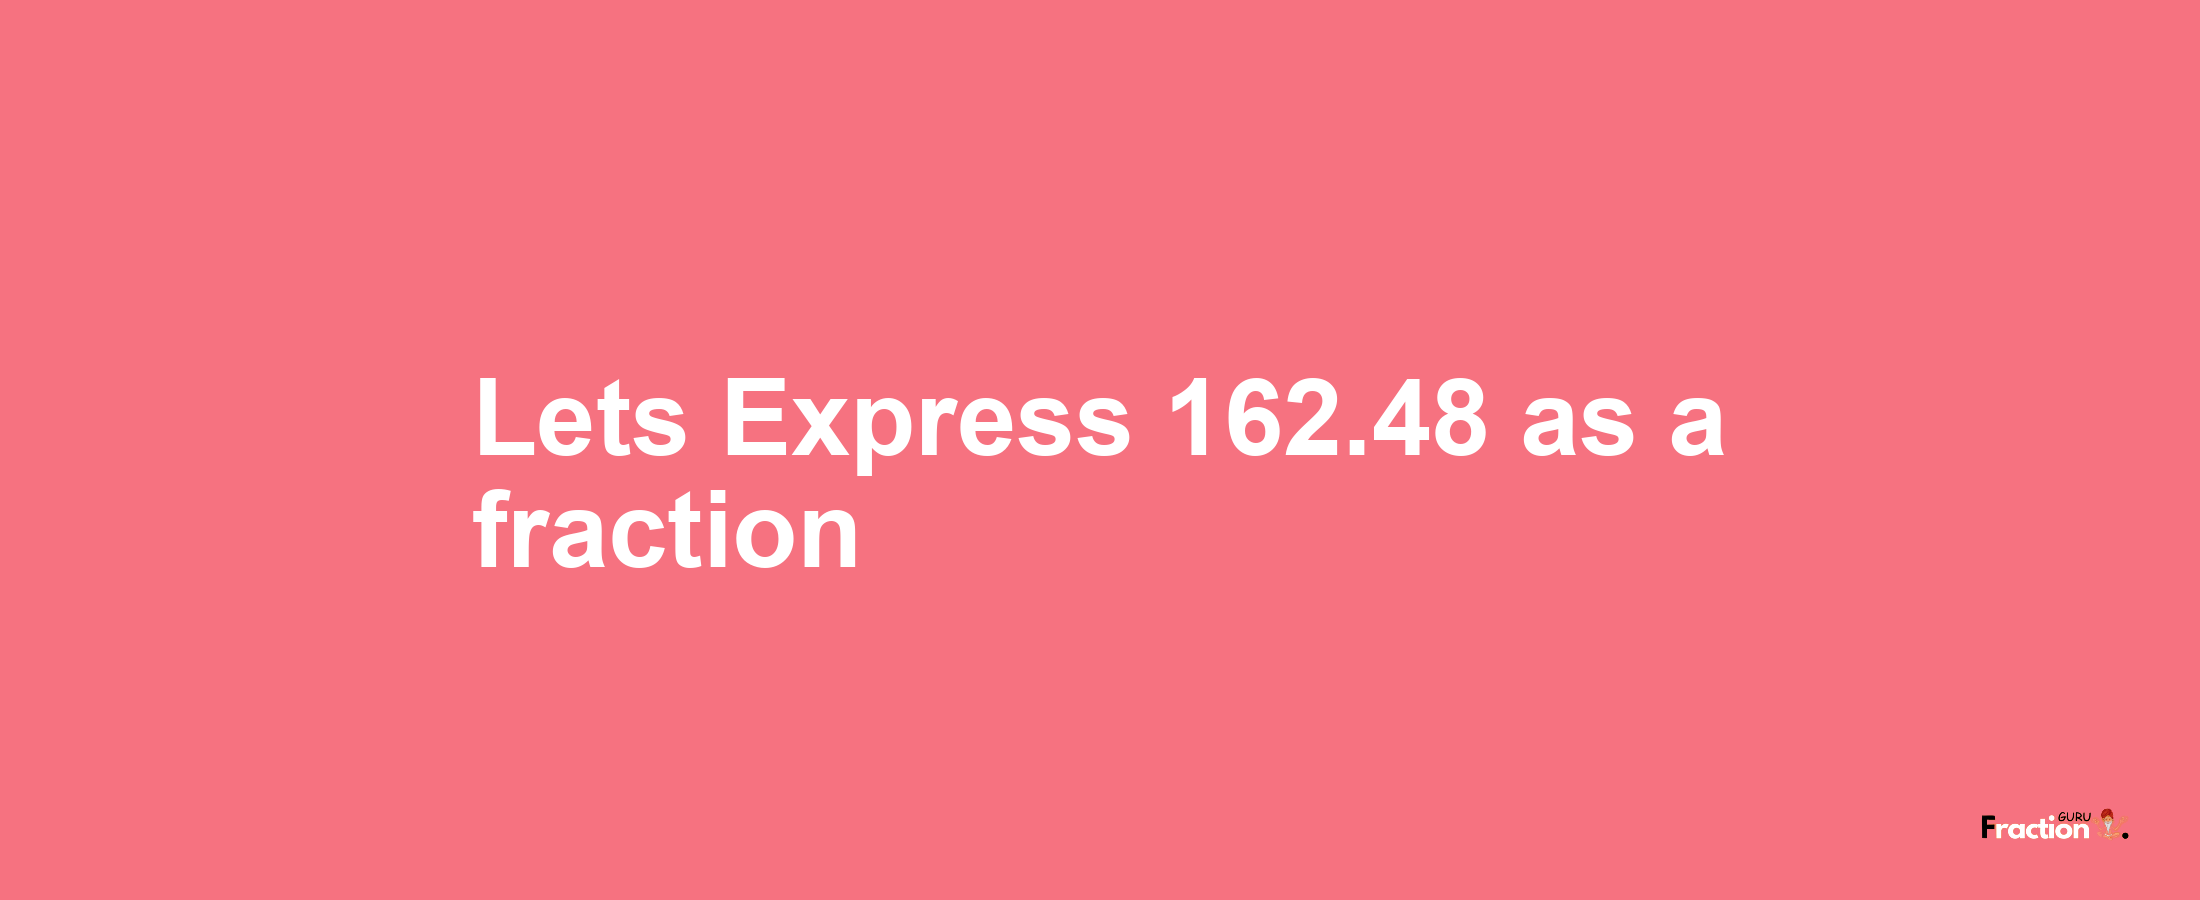 Lets Express 162.48 as afraction